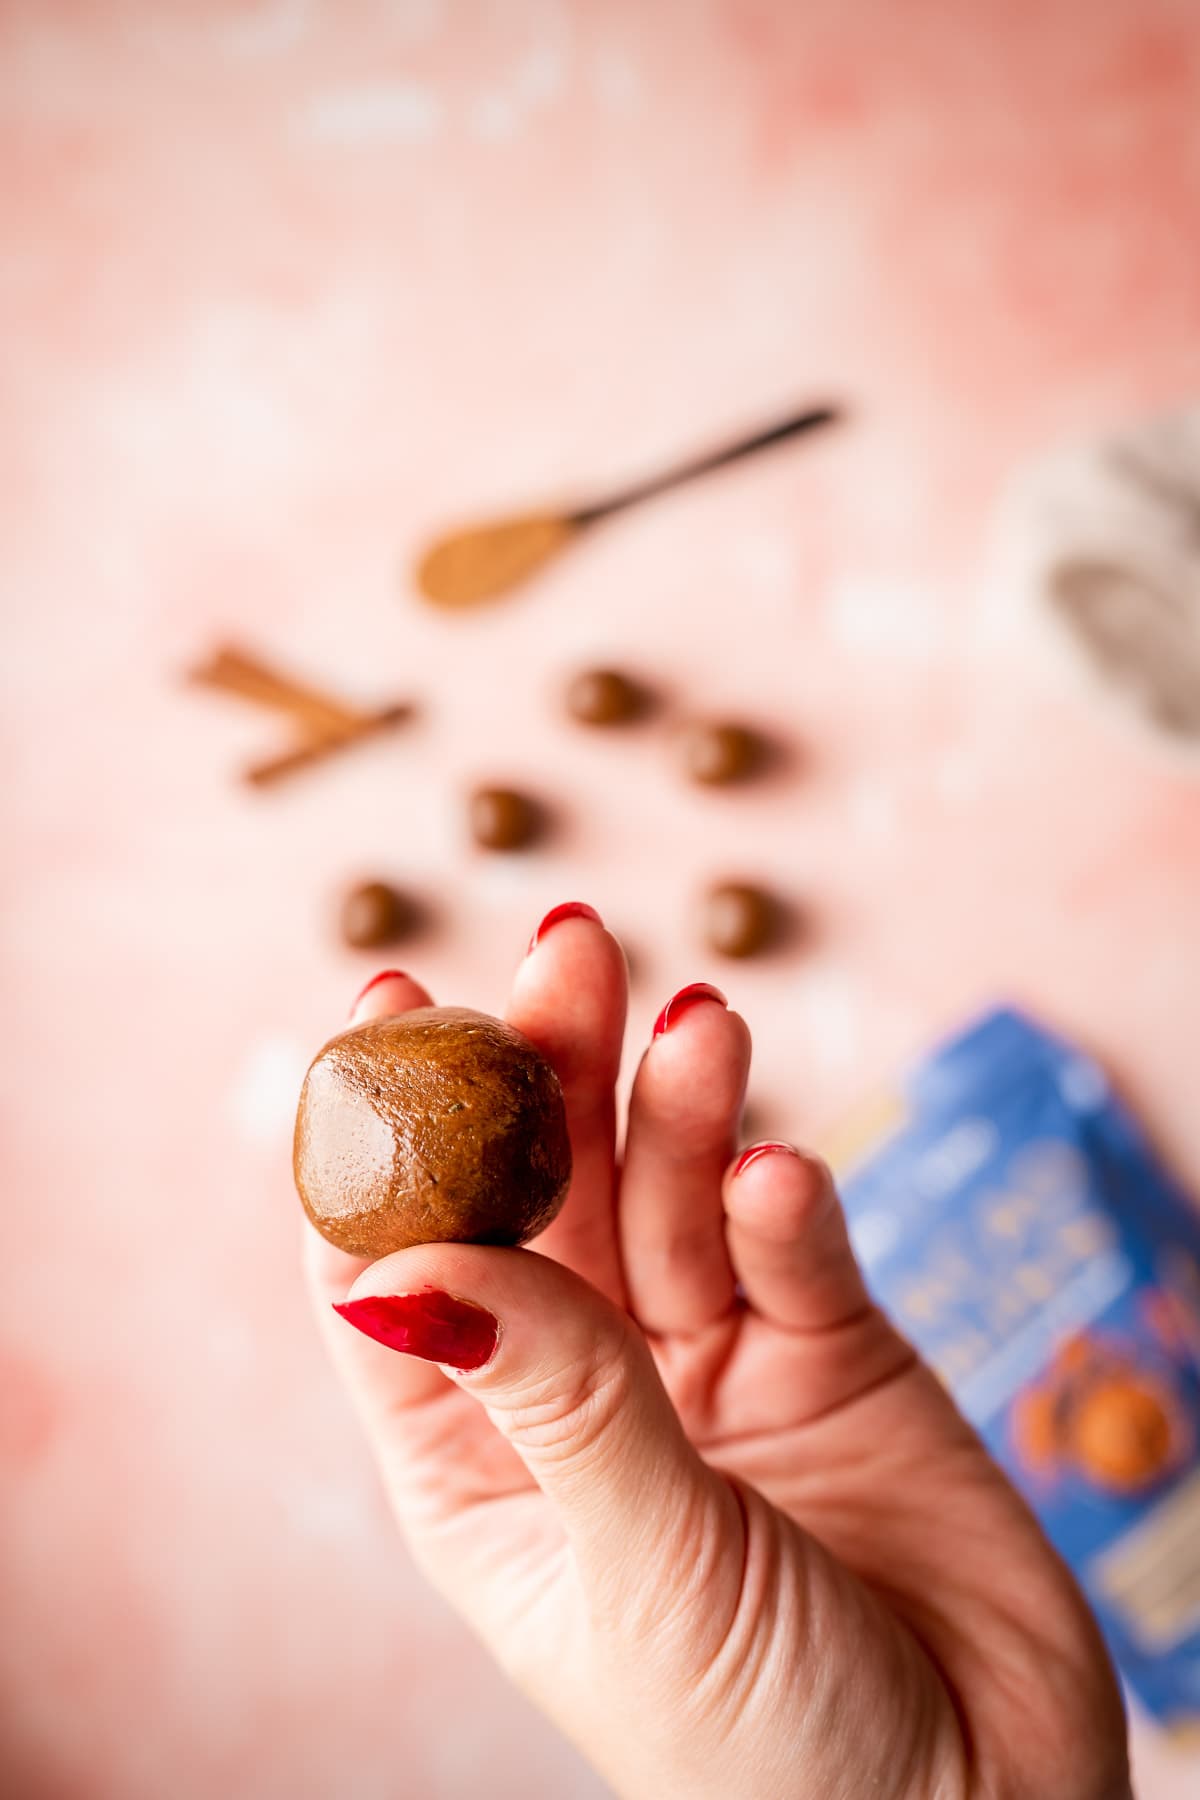 A hand with red painted nails holds a chocolate sunbutter bite close to the camera.